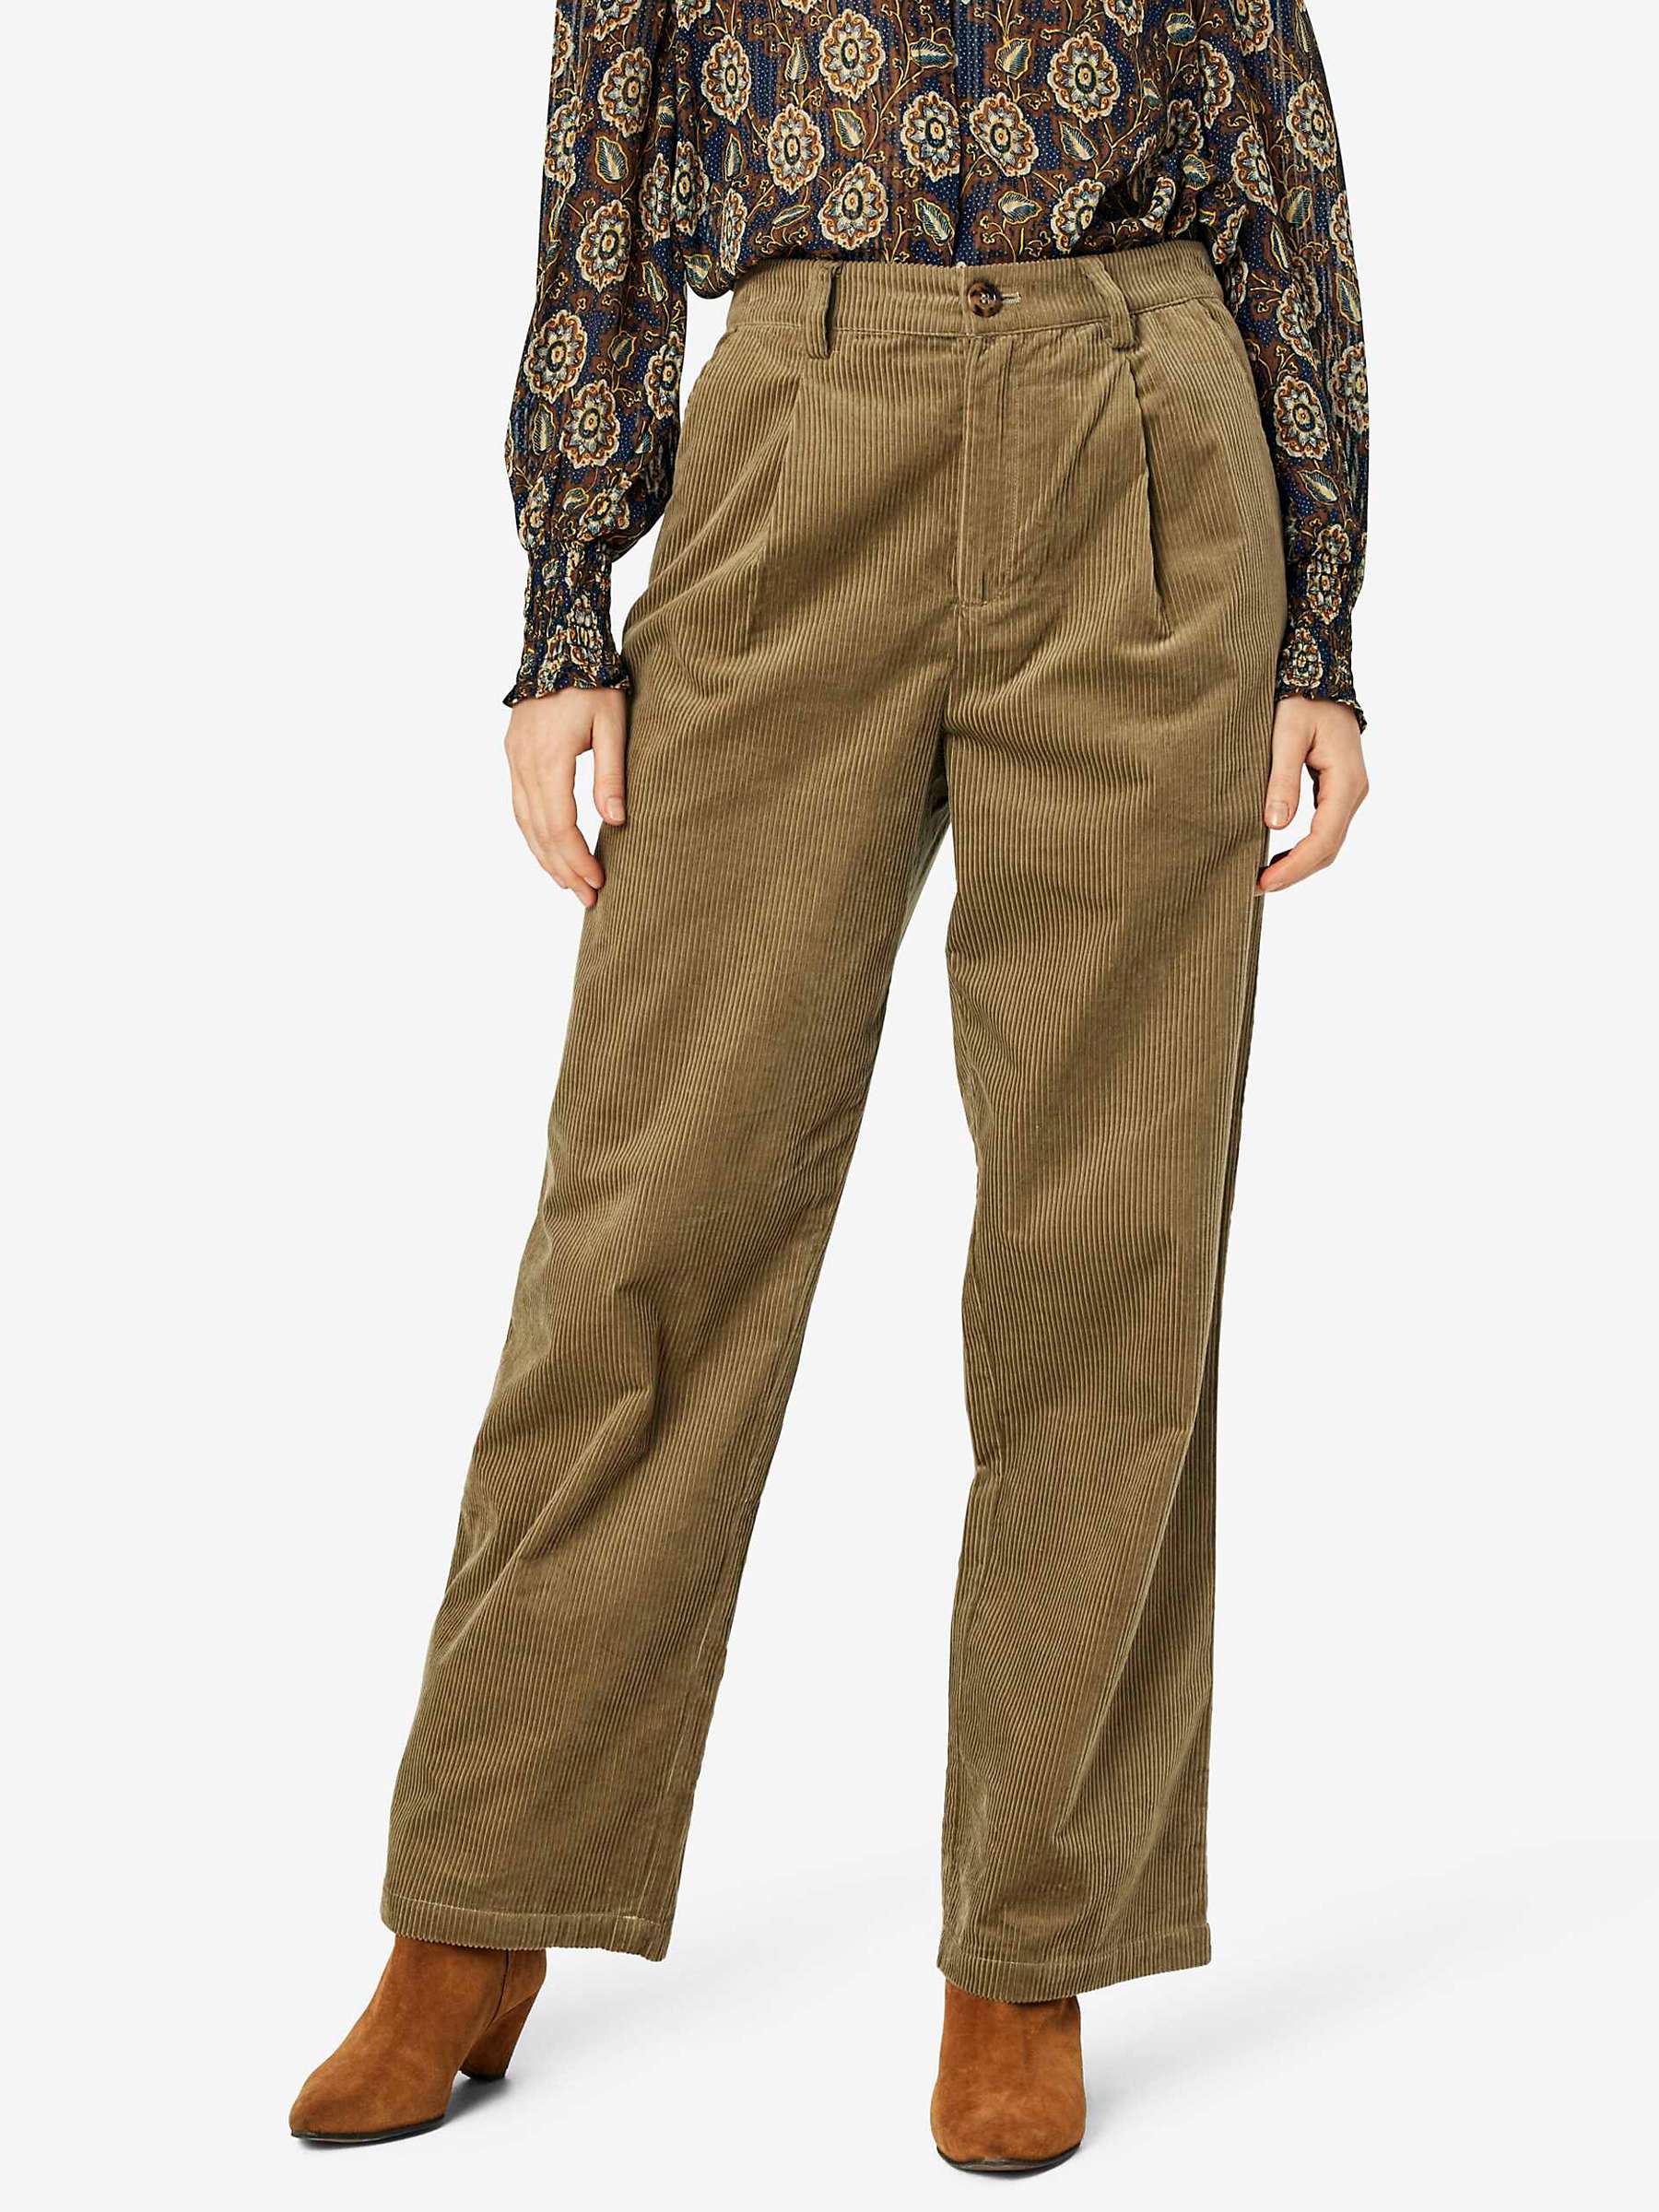 Noa Noa Trine Relaxed Cord Trousers, Capers Green at John Lewis & Partners